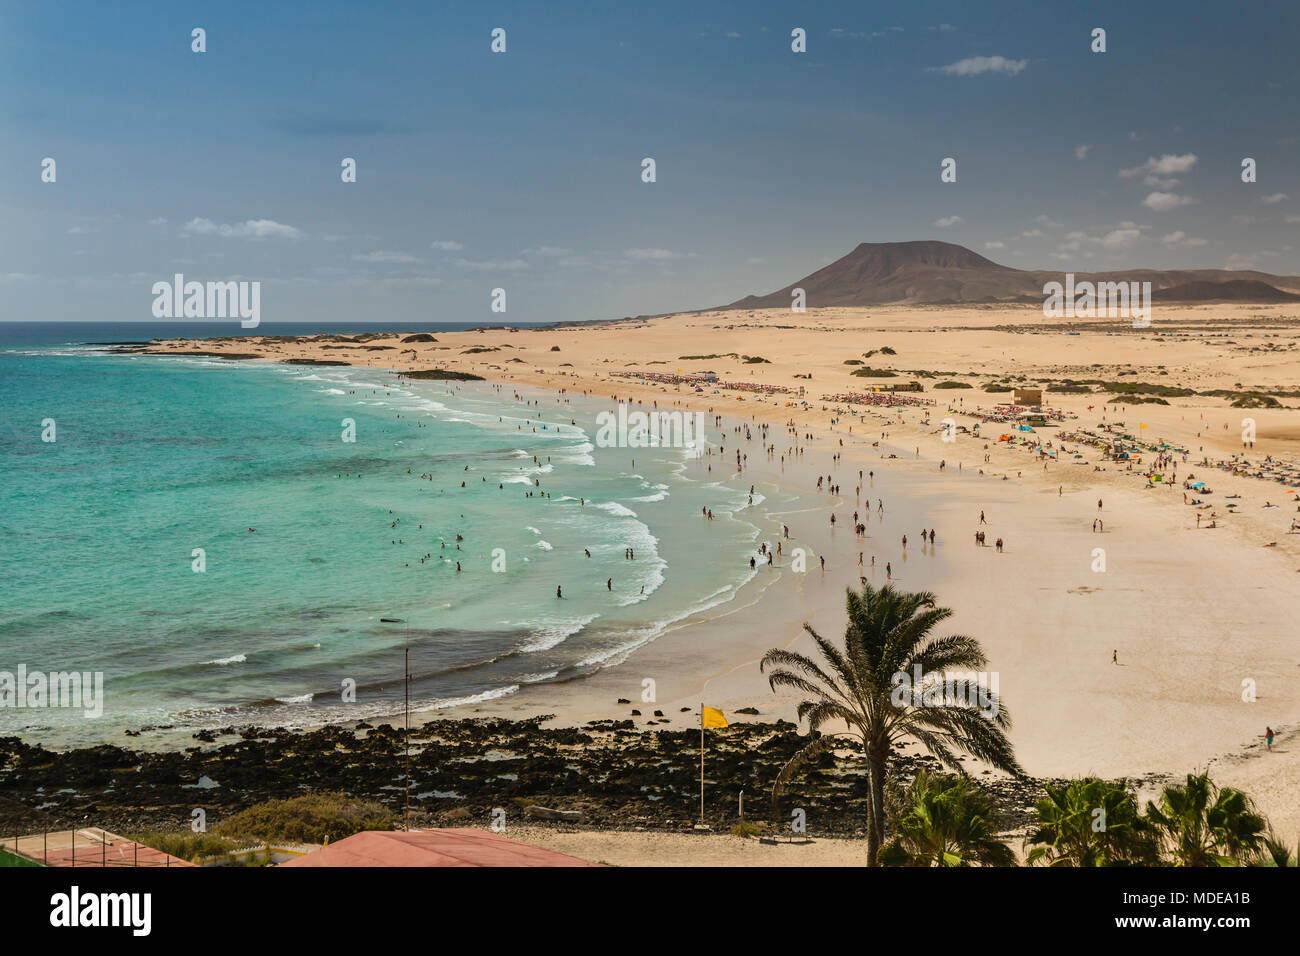 Aerial view of Corralejo Beach and its dunes crowded with tourists in Fuerteventura, Spain. Stock Photo